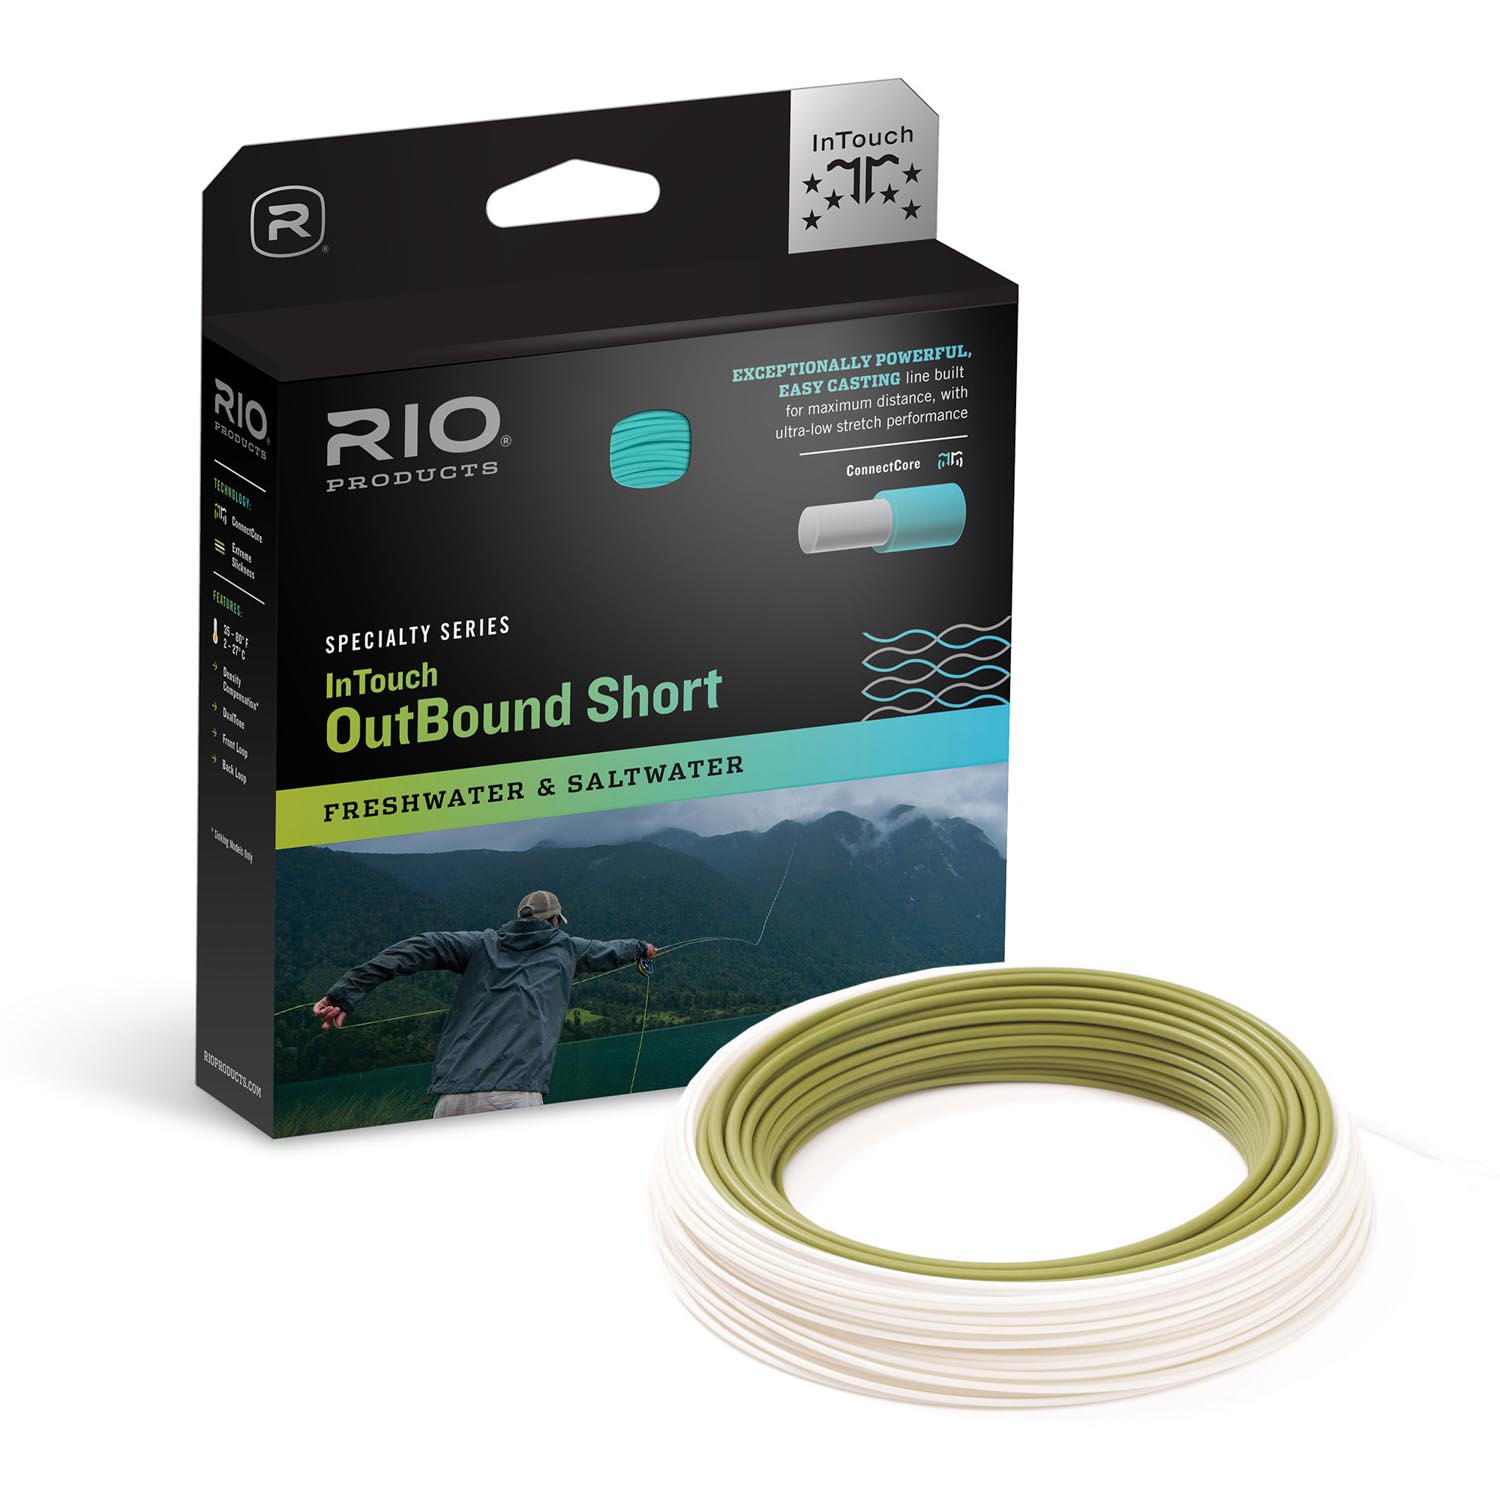 RIO Intouch Outbound Short - Sink 3